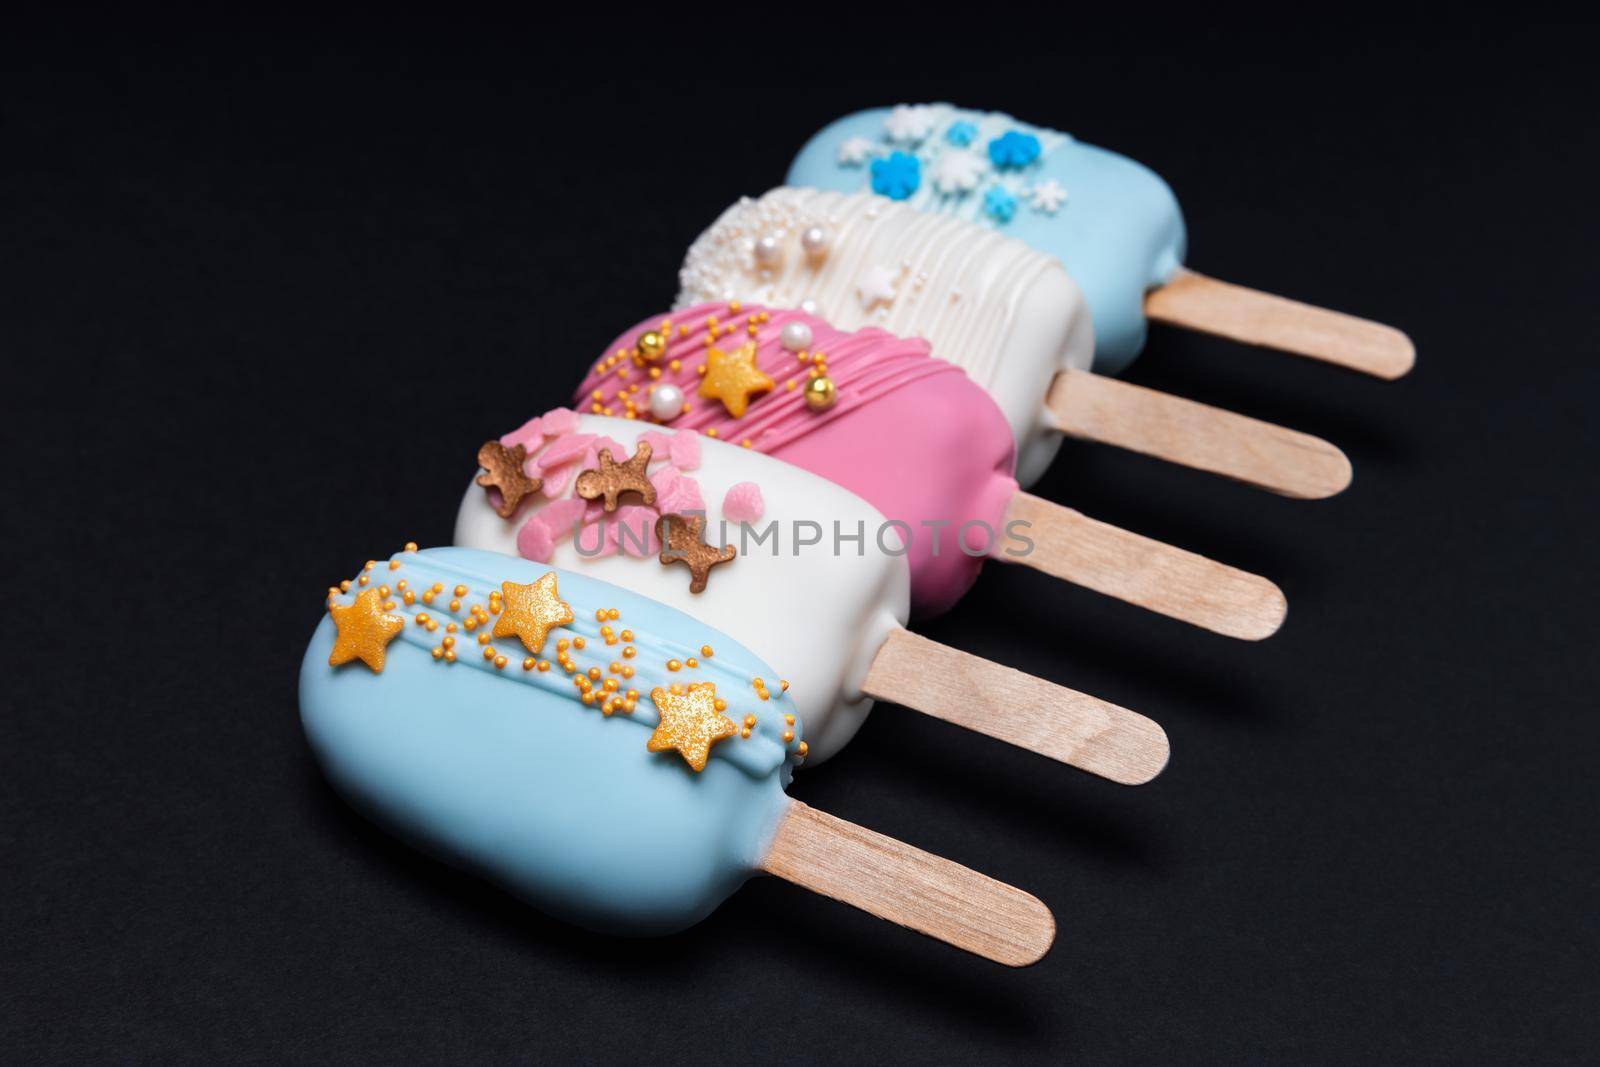 Five decorated cake pops ice creams in a row on black background